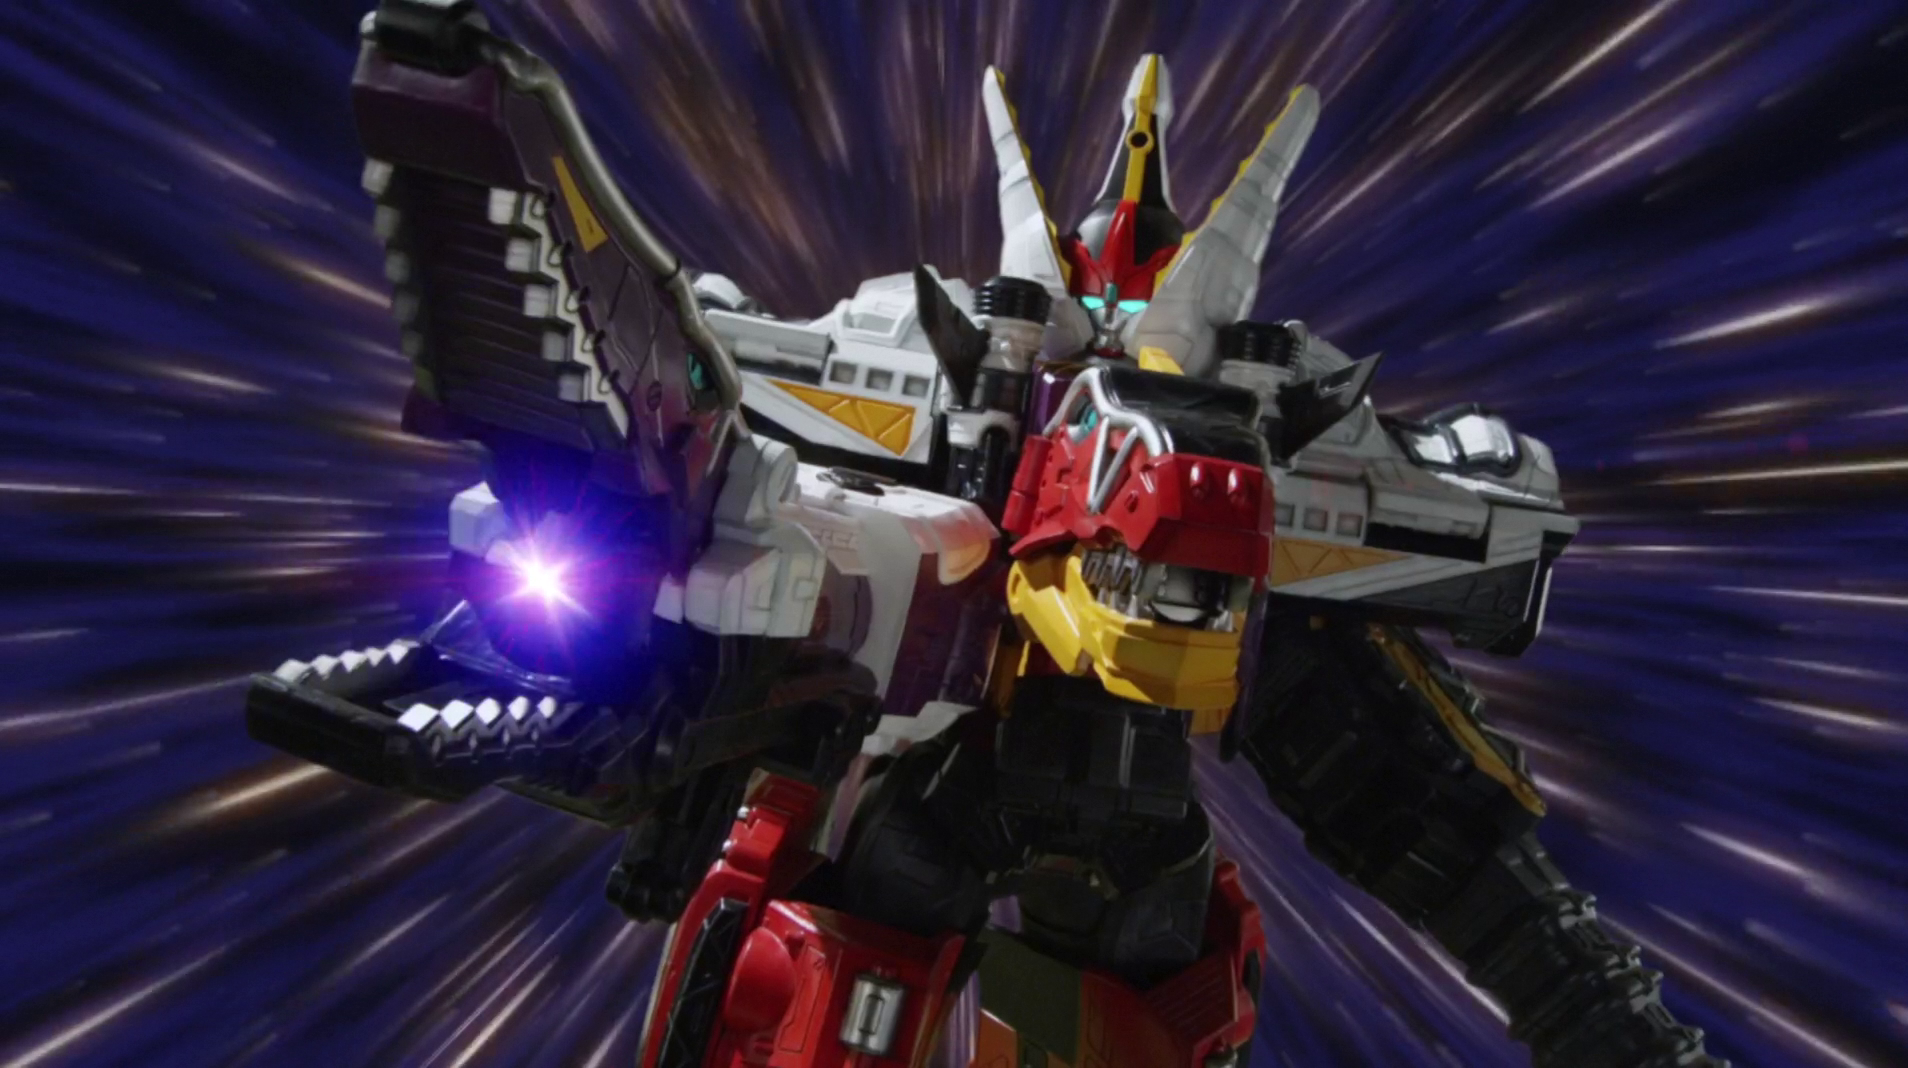 Plesio Charge Megazord (Pachy-Rex Formation) The Plesio Charge Megazord can...